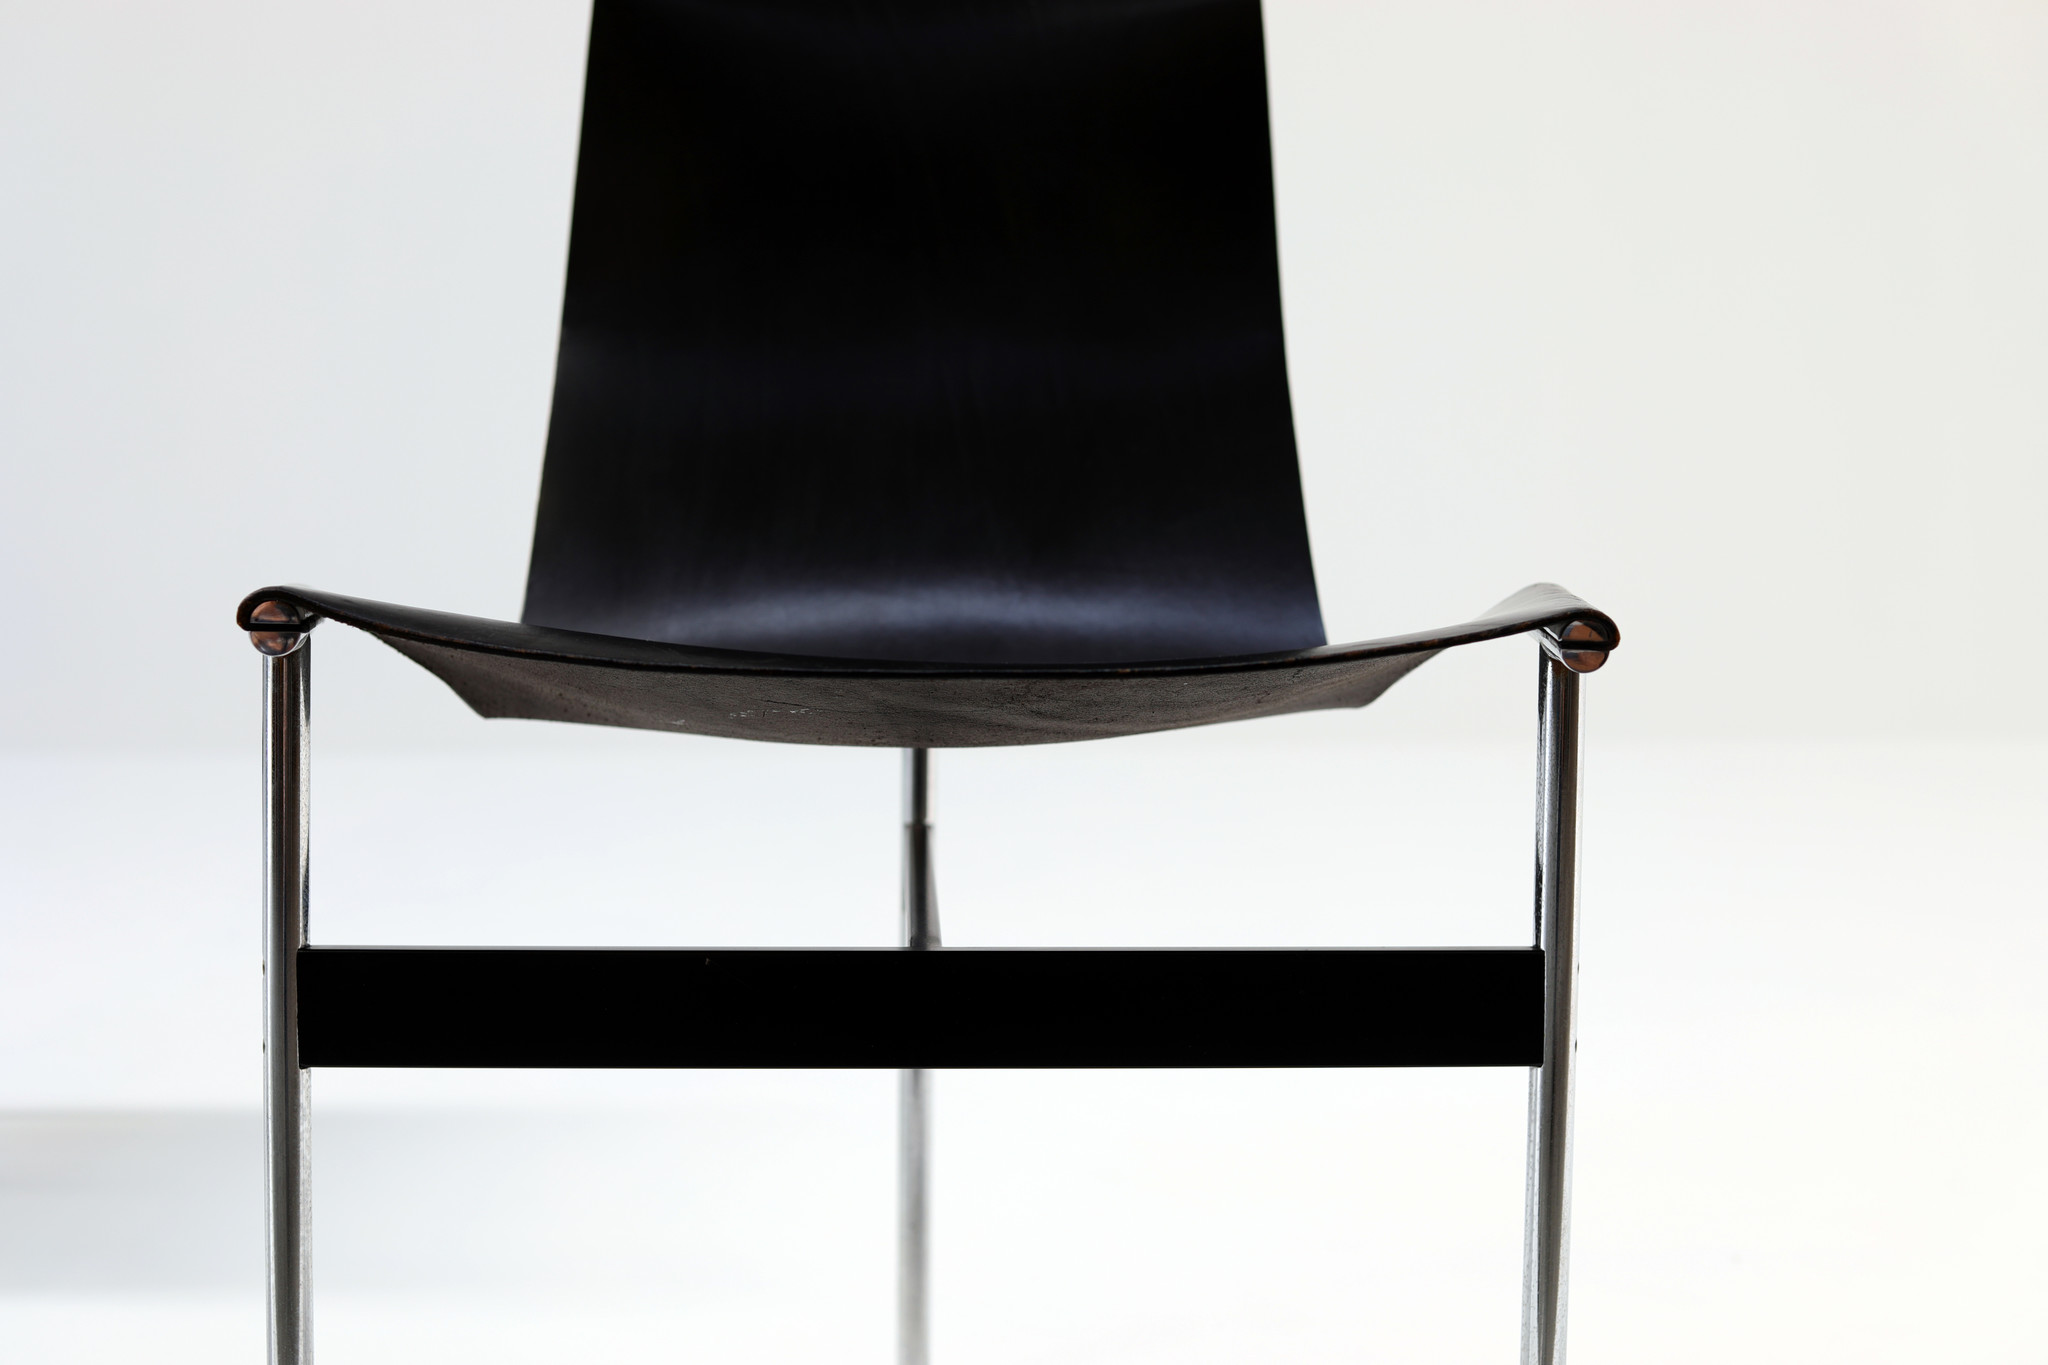 Laverne T-Chair by Katavolos, Littell and Kelley 1952